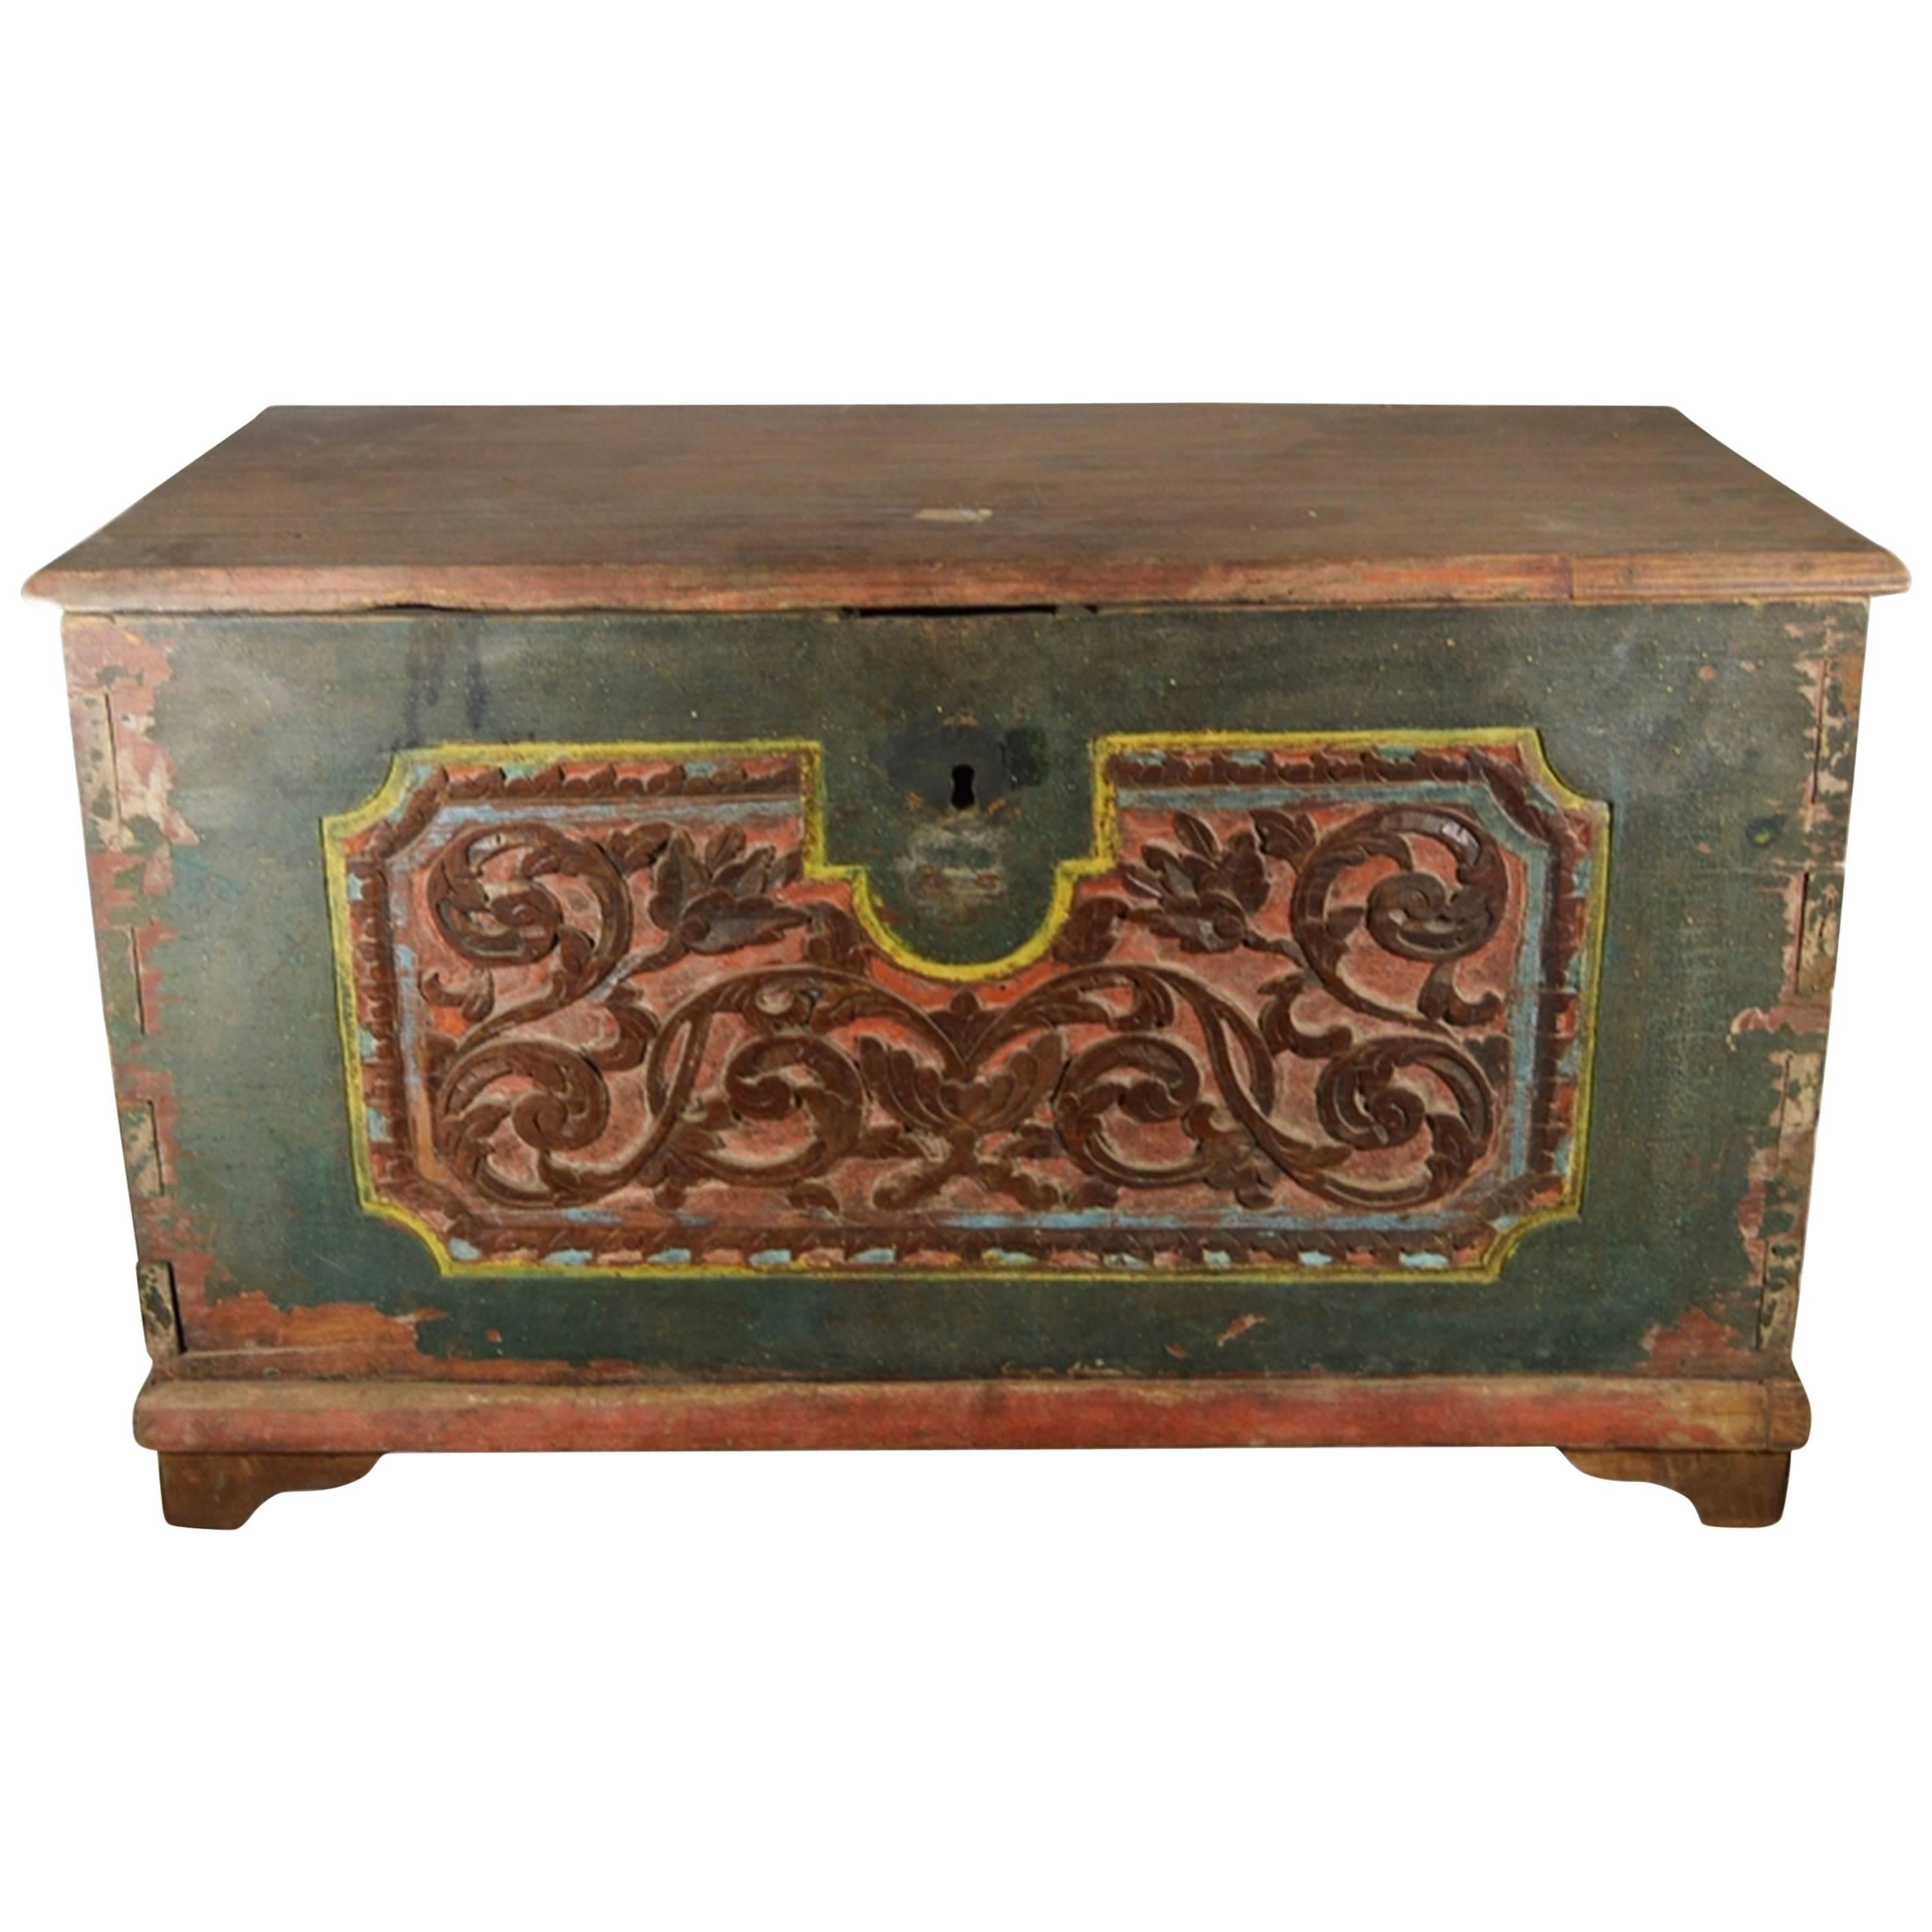 Antique Indonesian Hand-Carved and Painted Trunk with Foliage’s, 19th Century